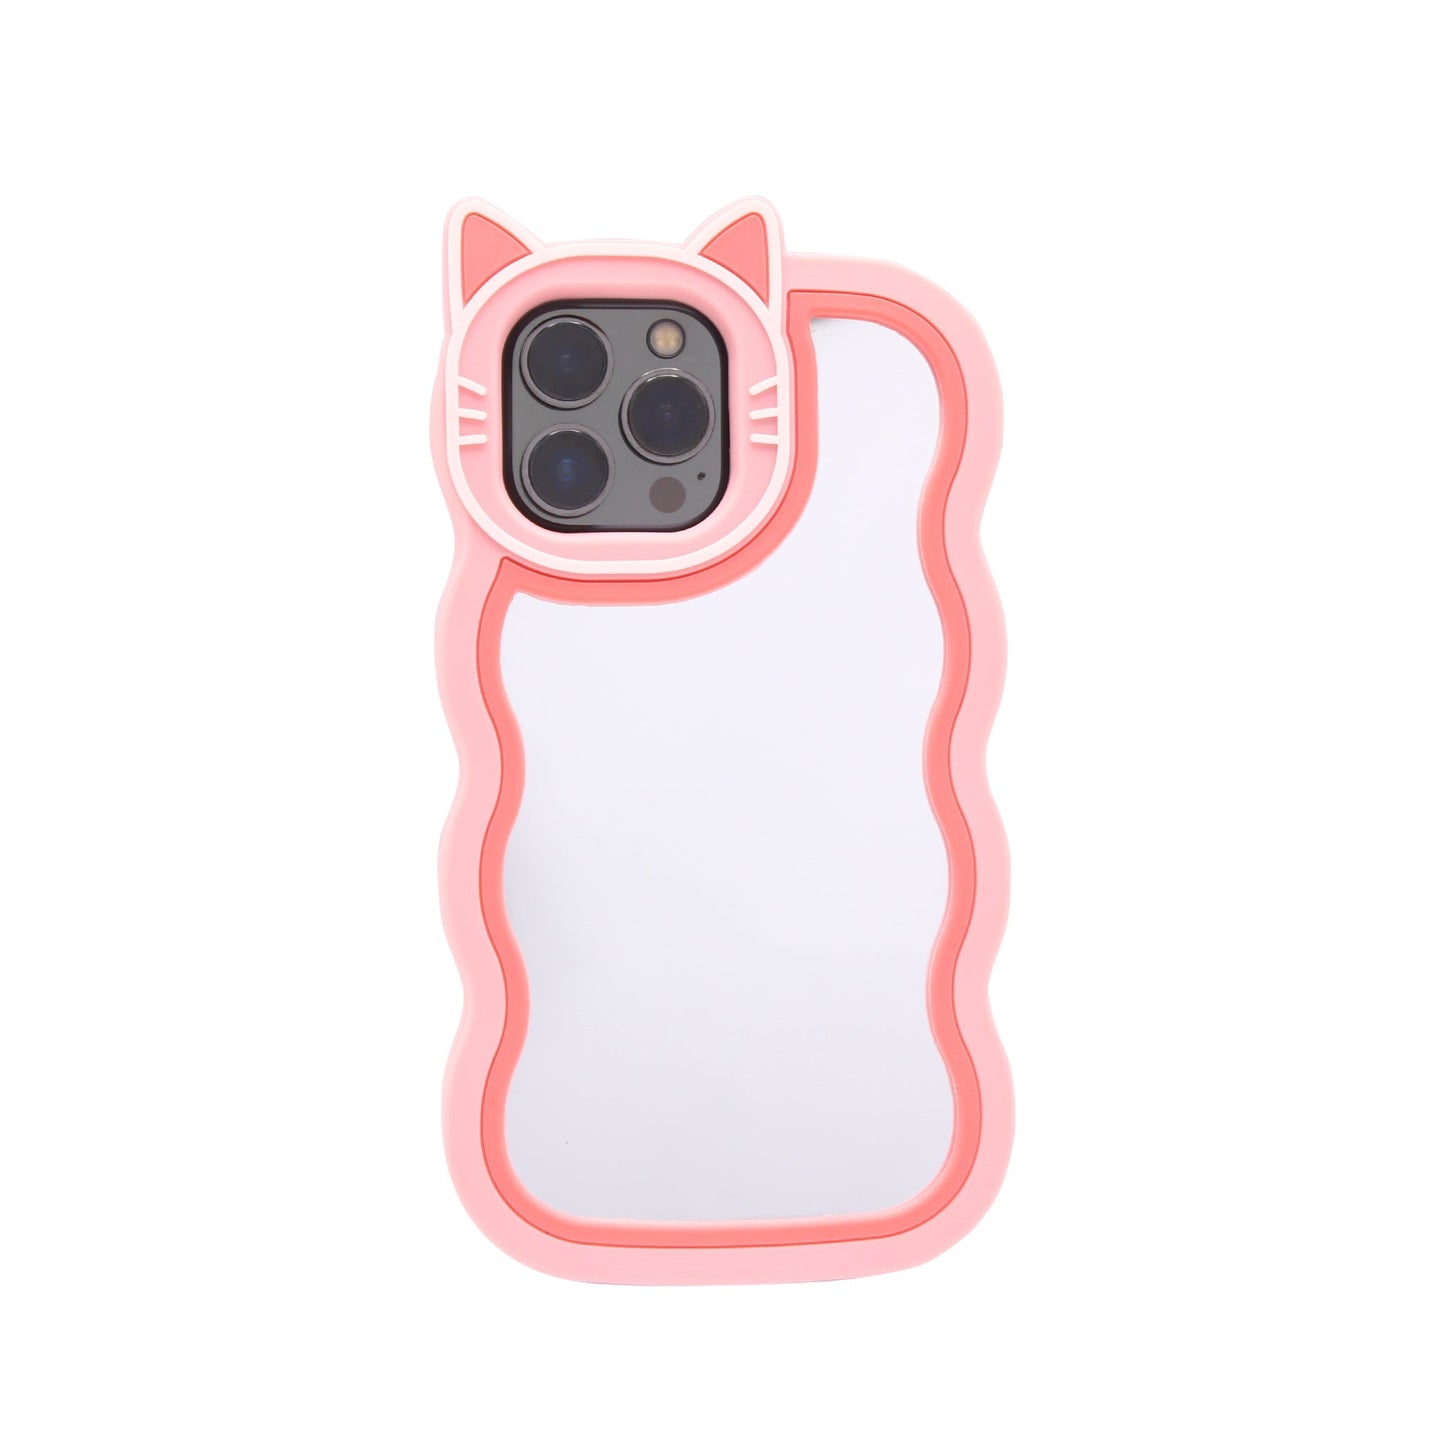 Funky Silicon Case For Iphone